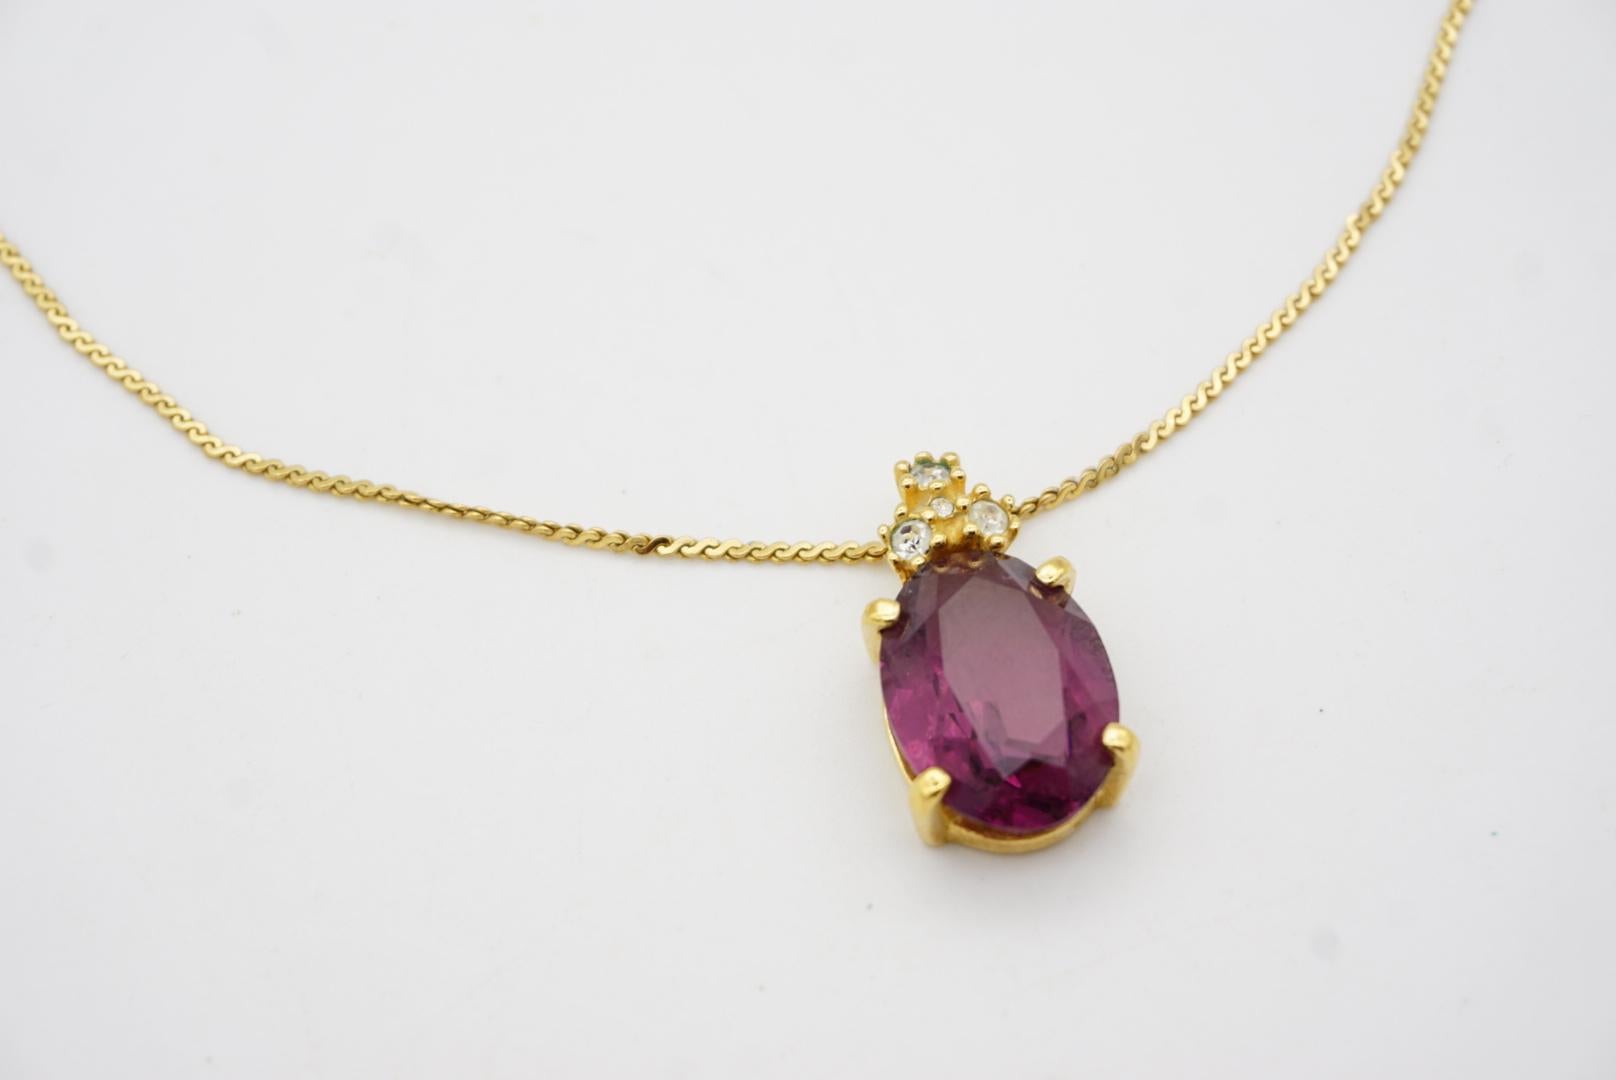 Christian Dior Vintage 1980s Amethyst Purple Oval Crystals Gold Pendant Necklace For Sale 4